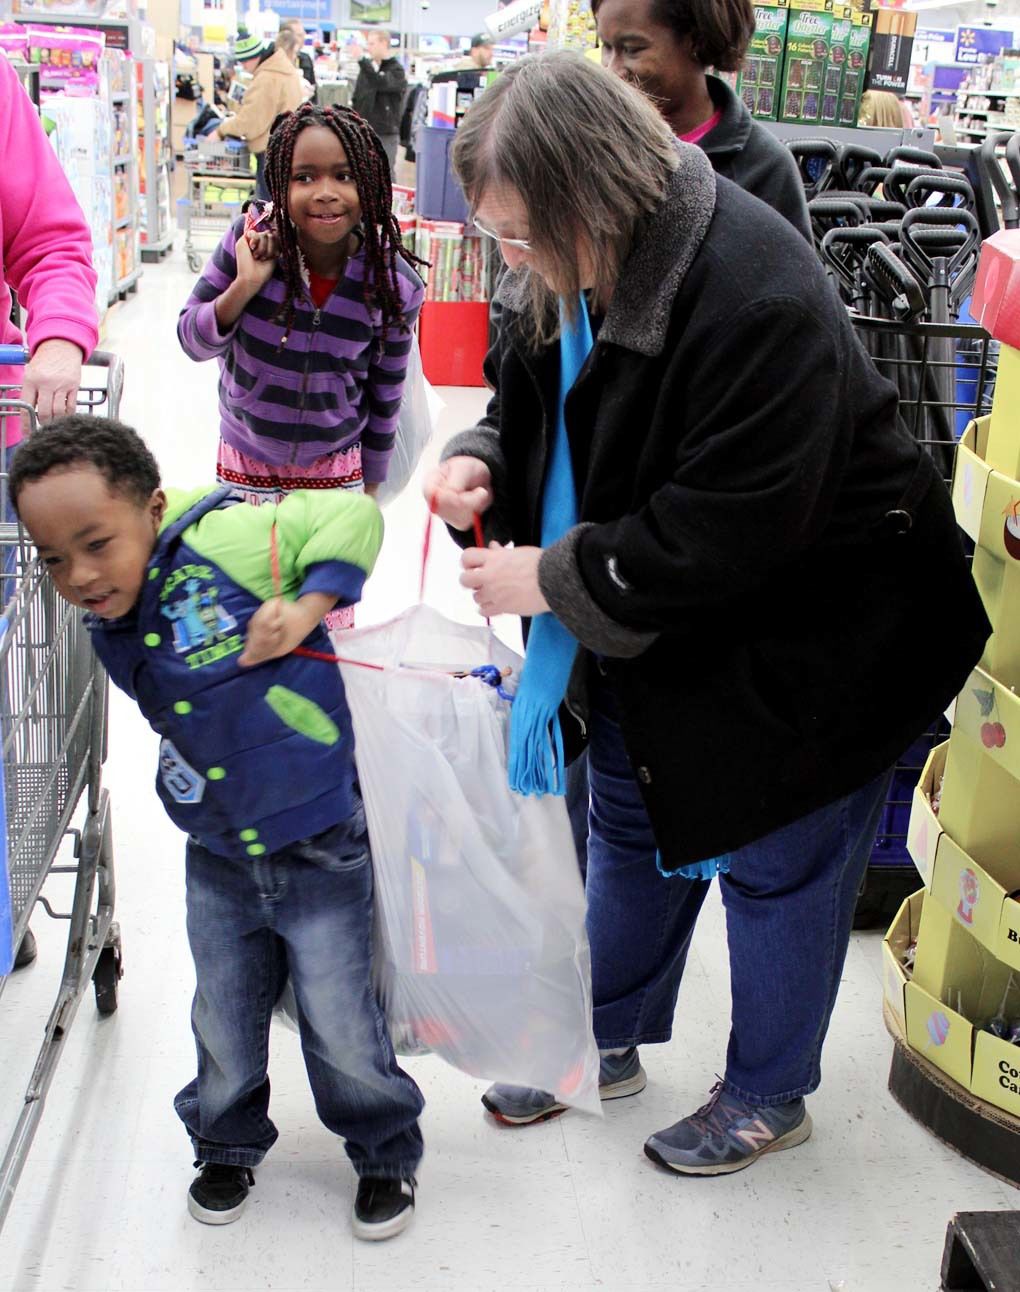 Joy abundant during annual Shop with a Cop event | Local News ...